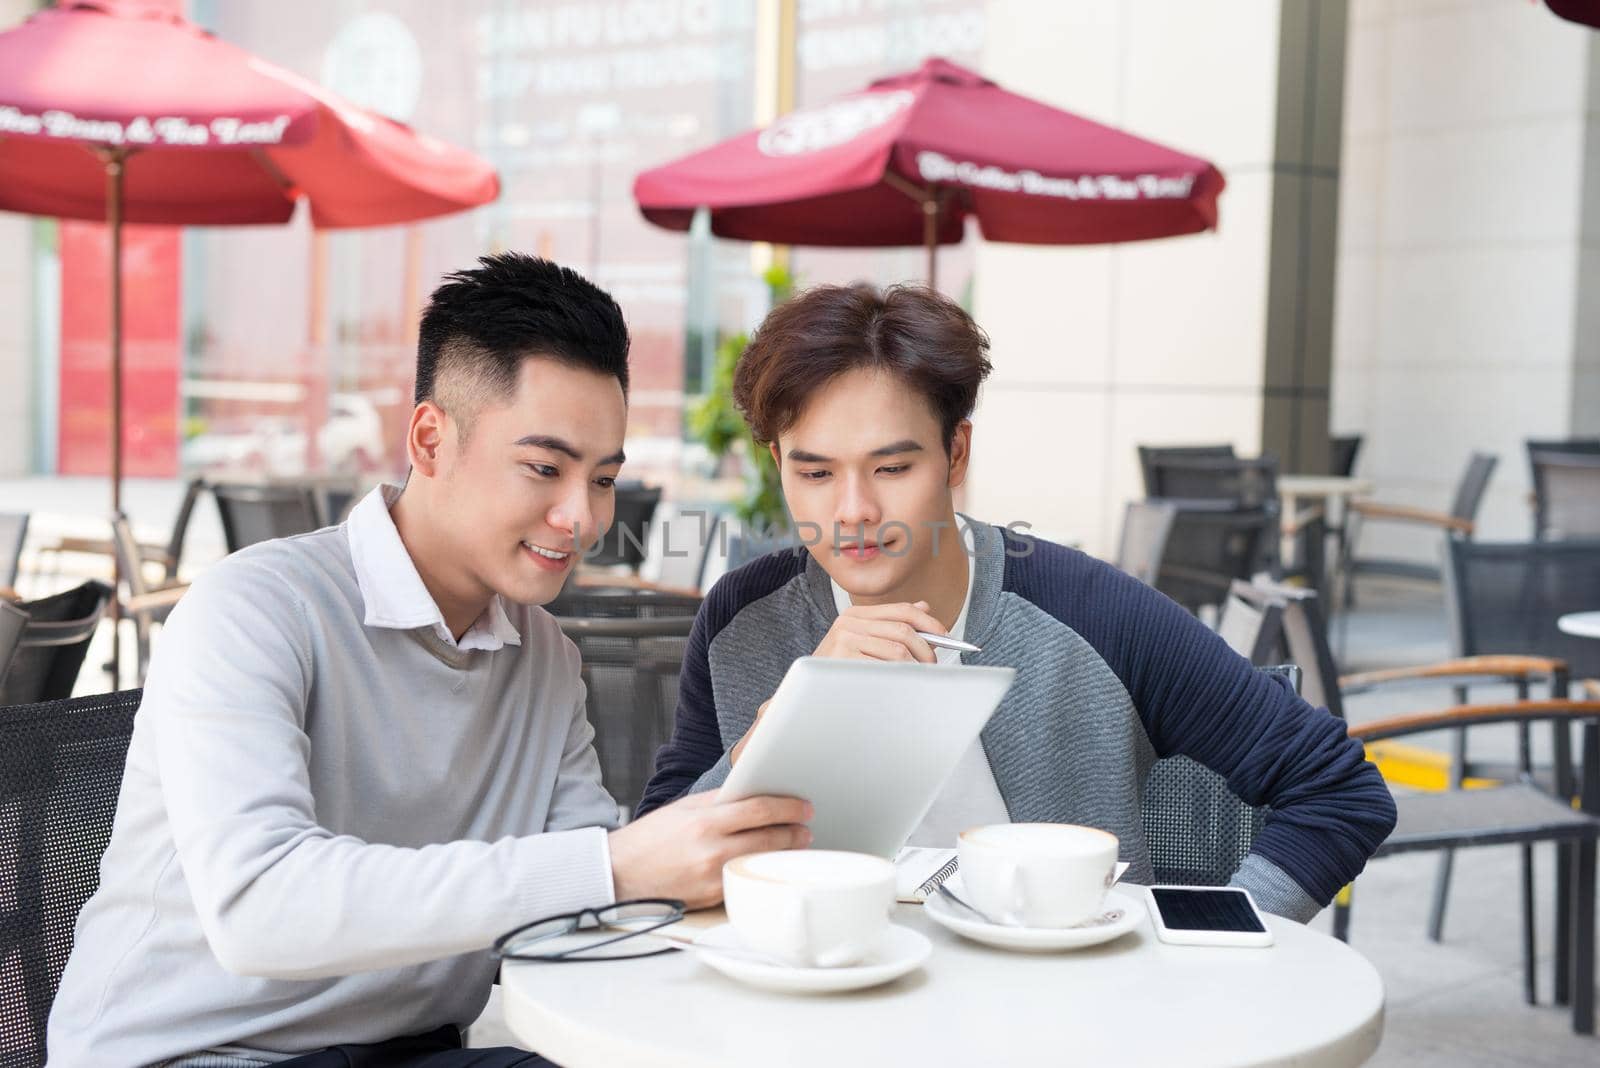 Two young handsome businessmen in casual clothes smiling, talking in coffee shop.